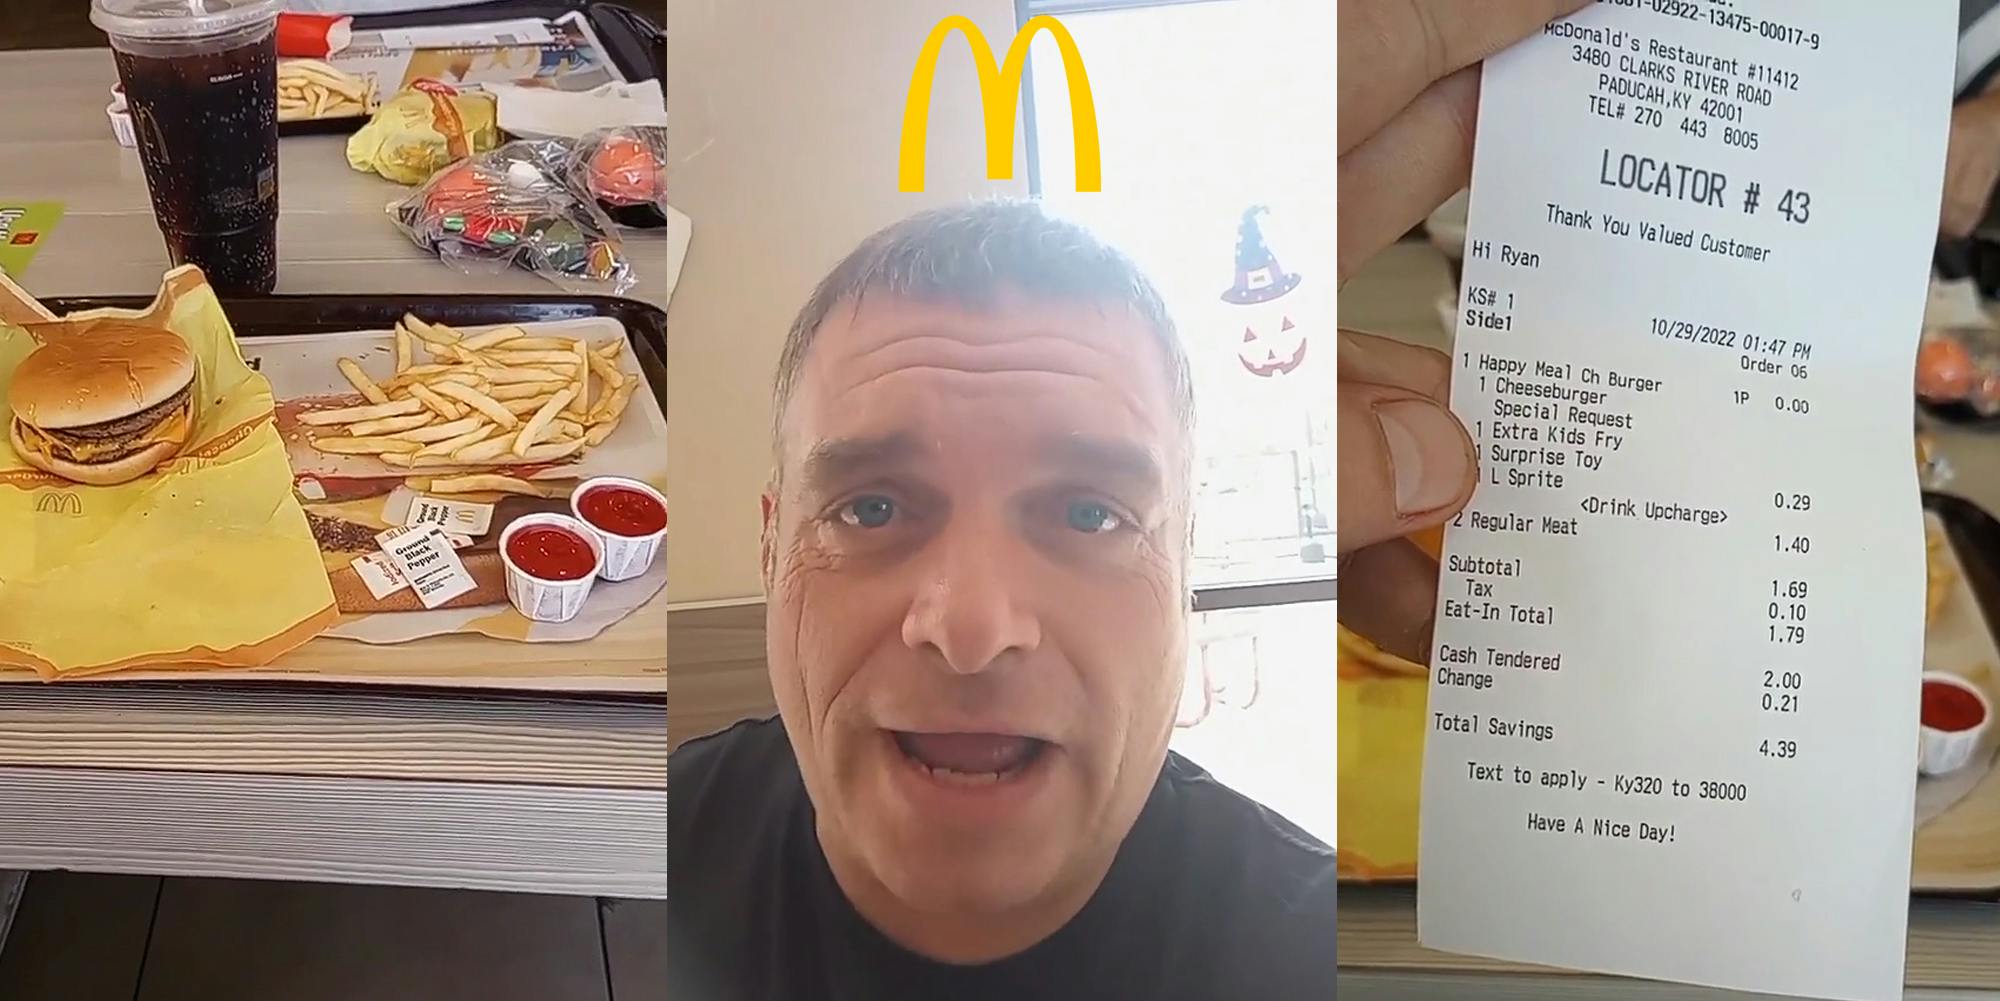 Man Exposes Flaw in McDonald's App With 1.79 Meal Deal Hack